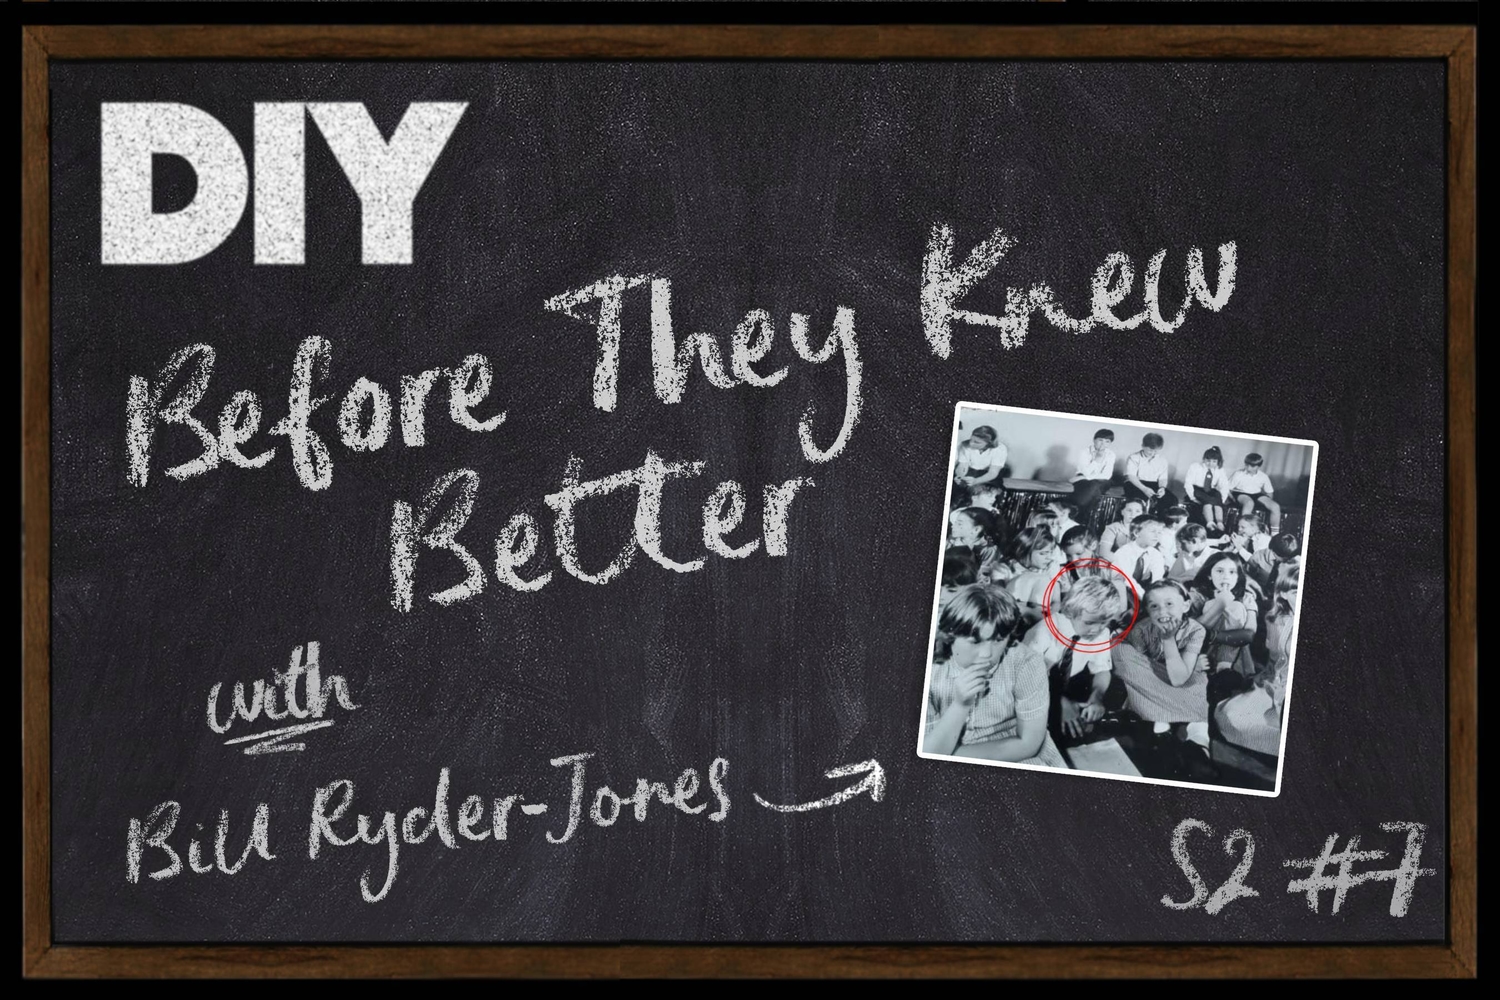 Bill Ryder-Jones on growing up with grief on the latest episode of Before They Knew Better